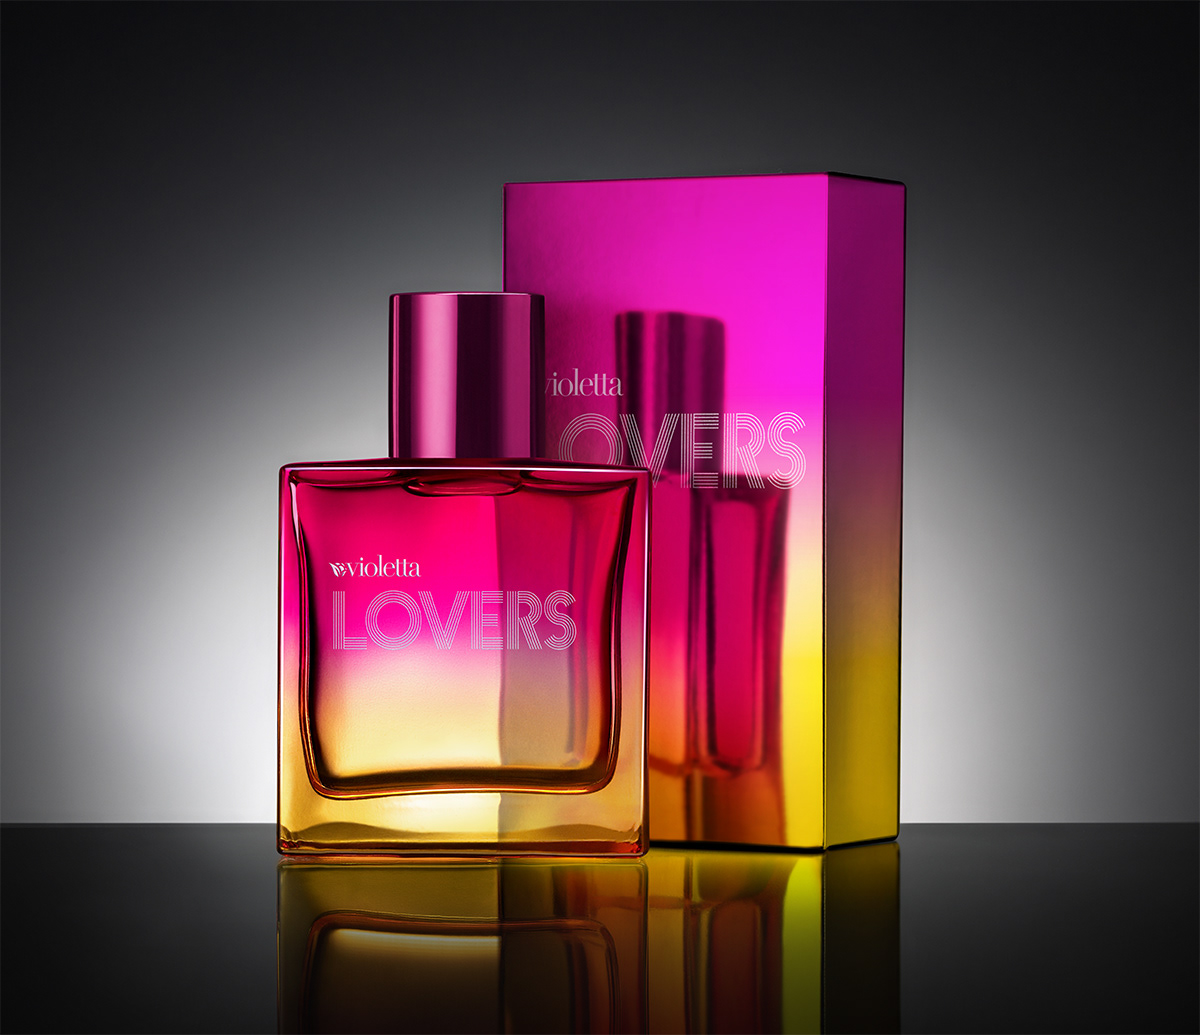 color cover drops Fragrance light Lovers Packaging parfum perfume perfumery